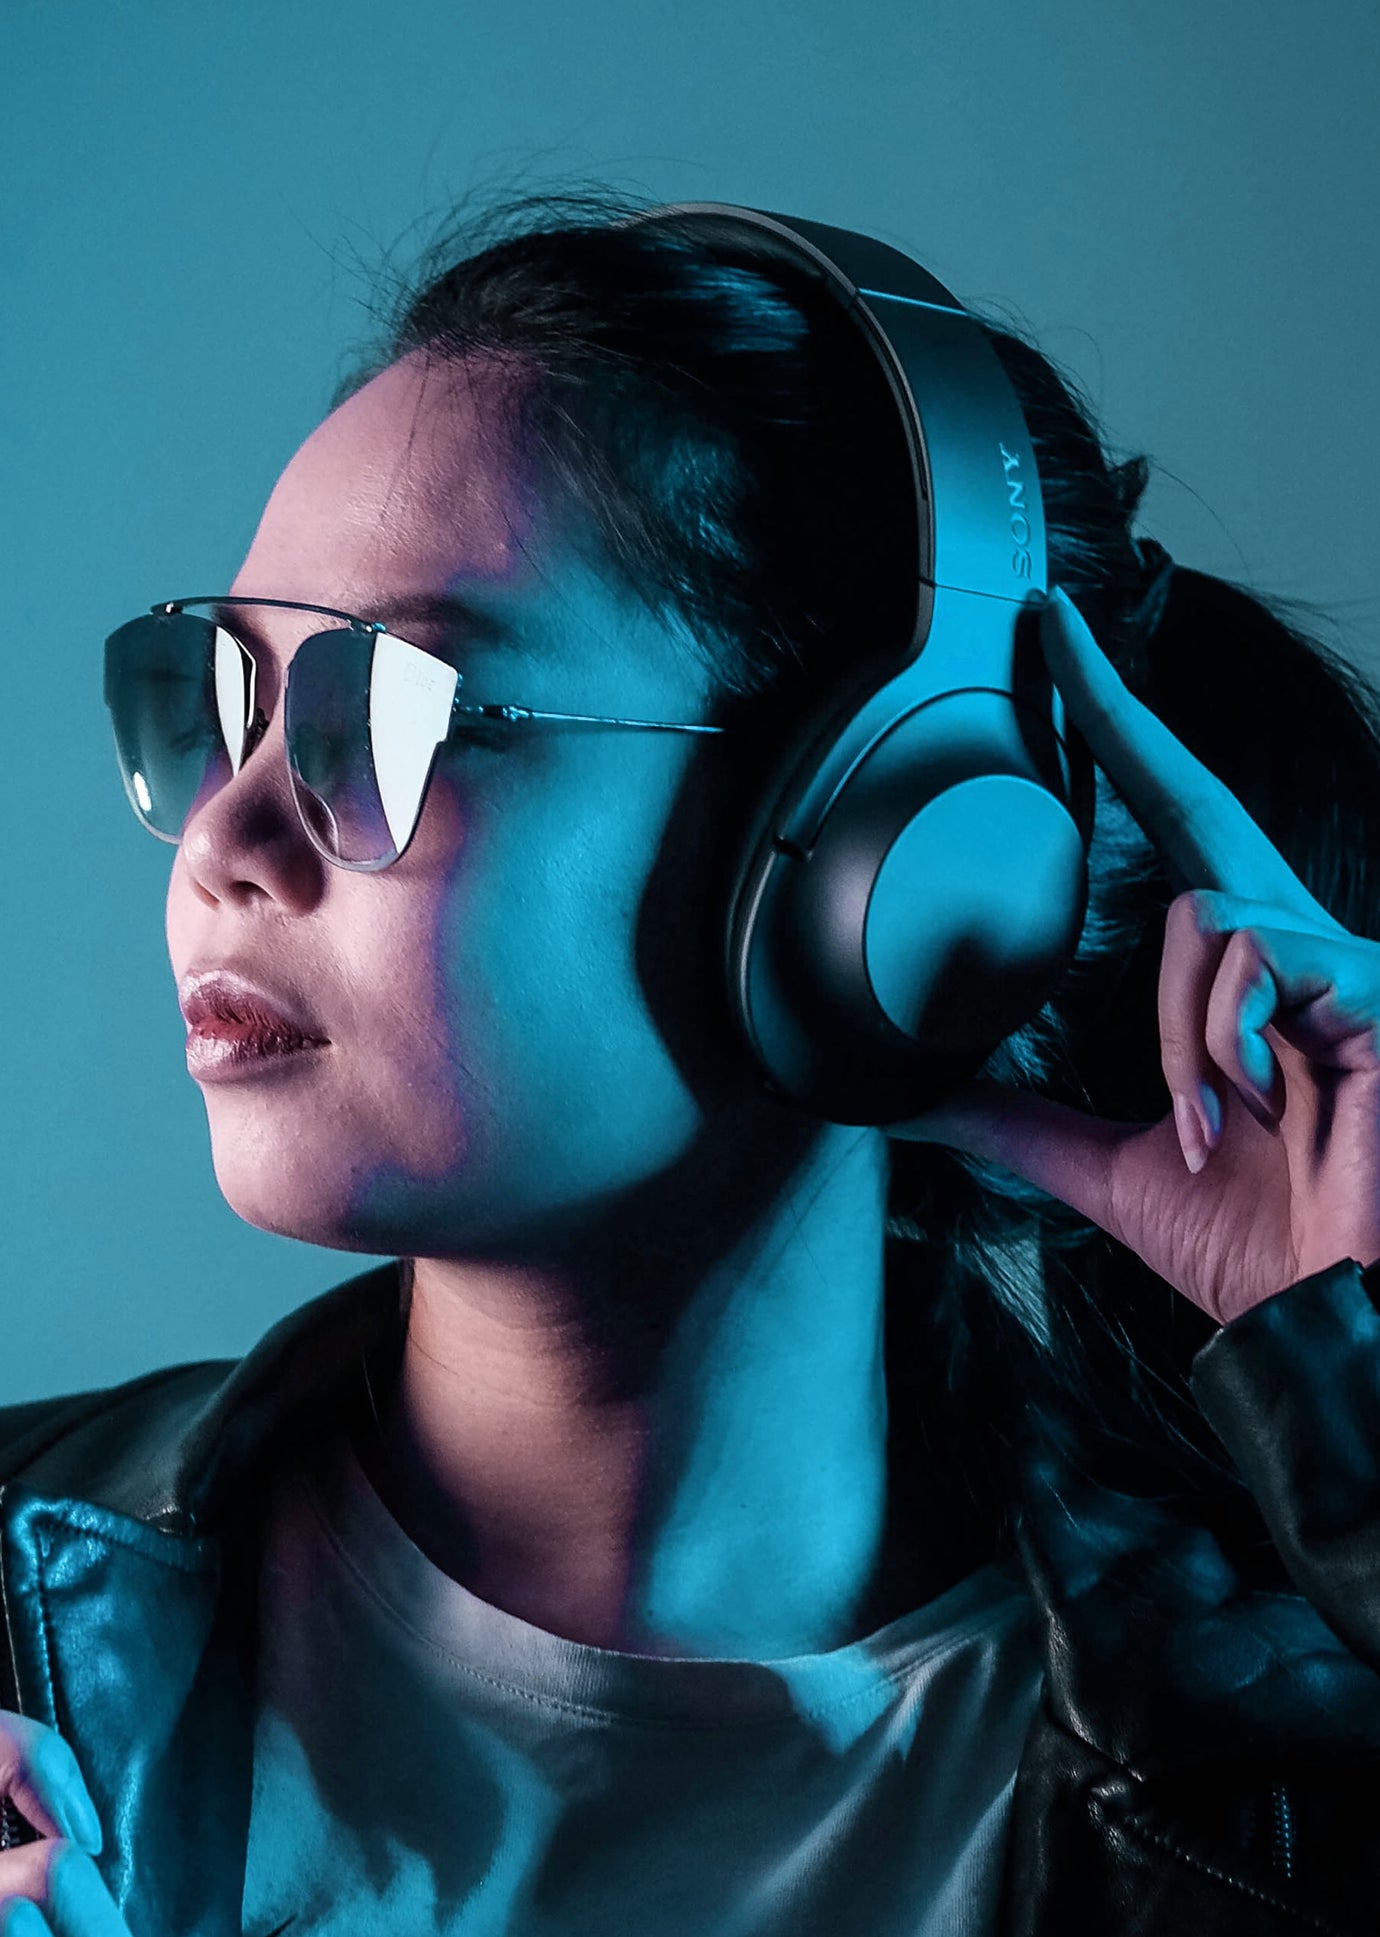 Asian woman with sunglasses holding headphones on her head